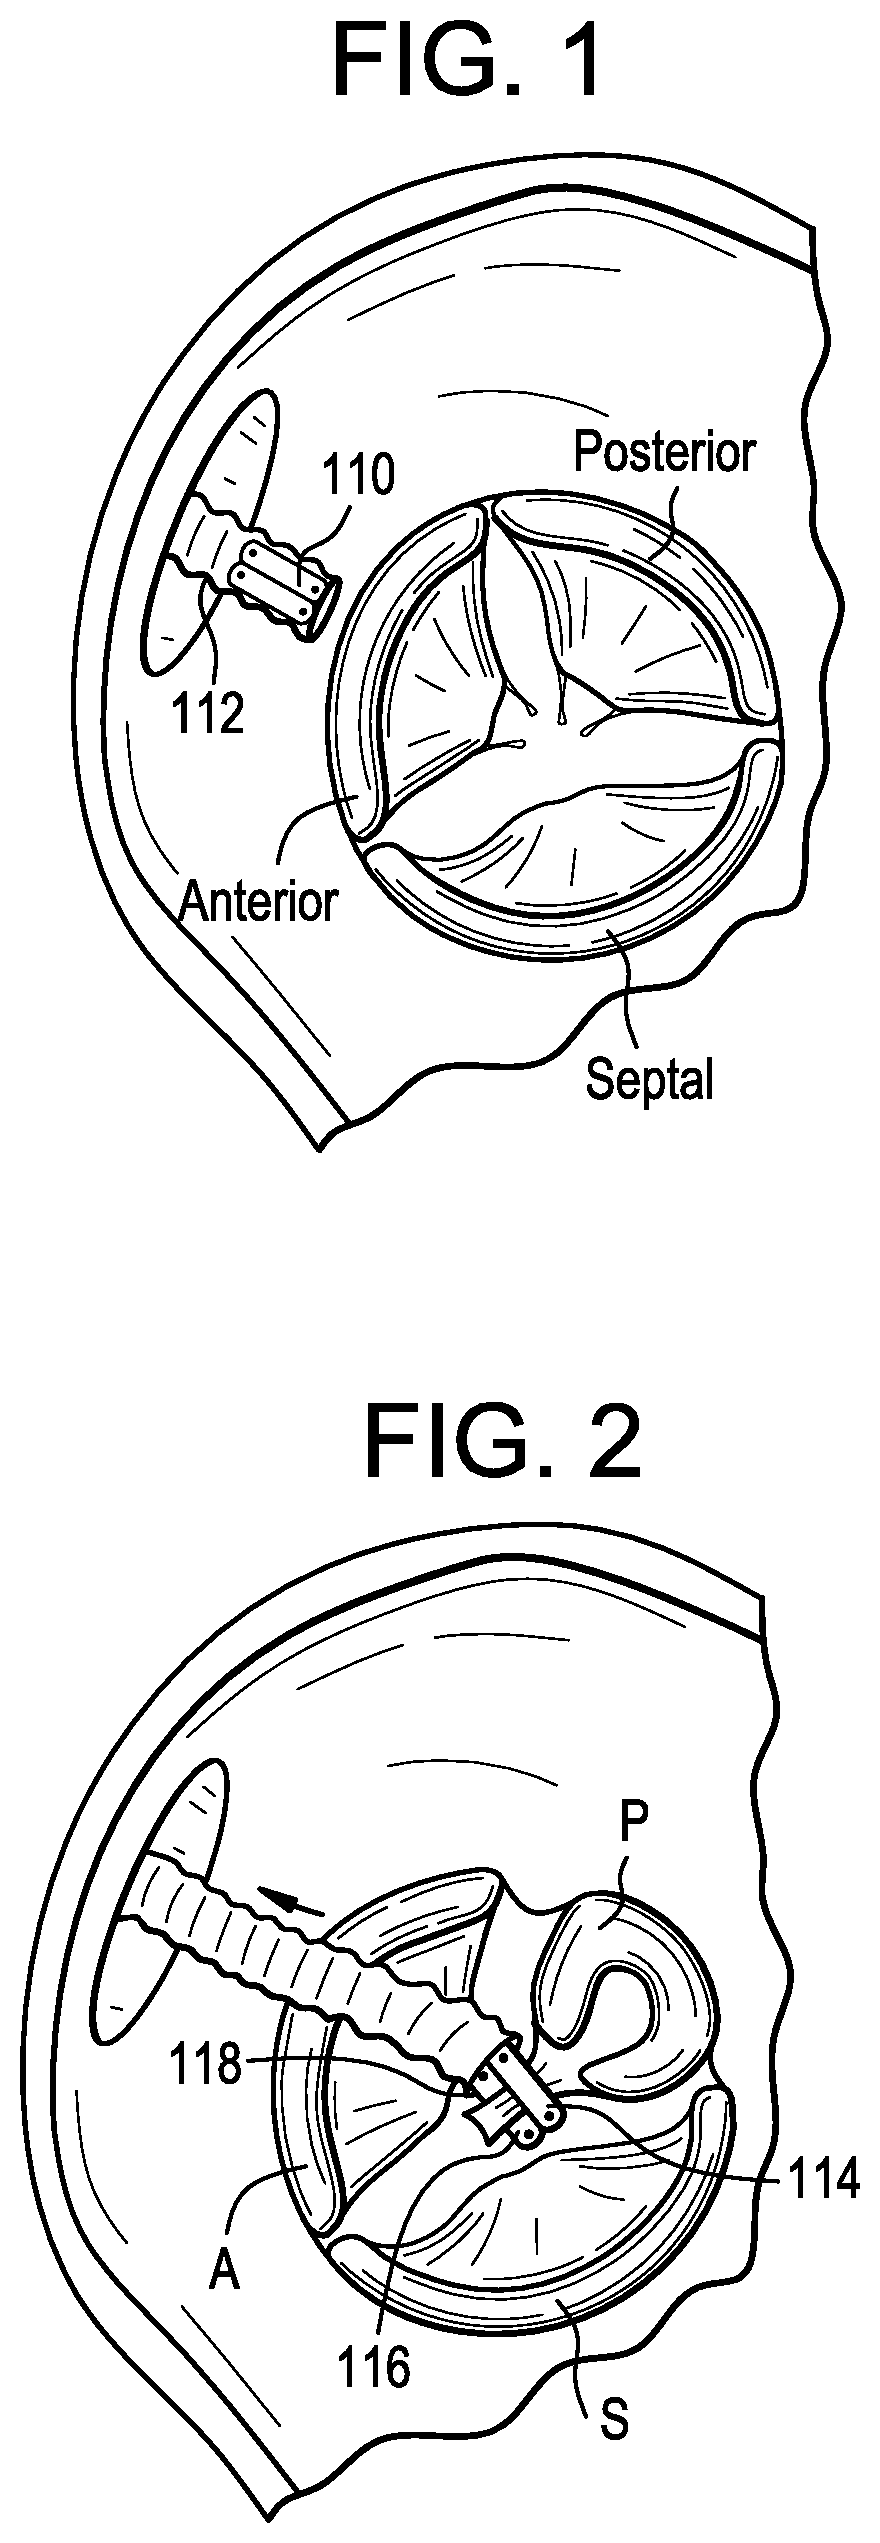 Device and method to plicate the tricuspid valve